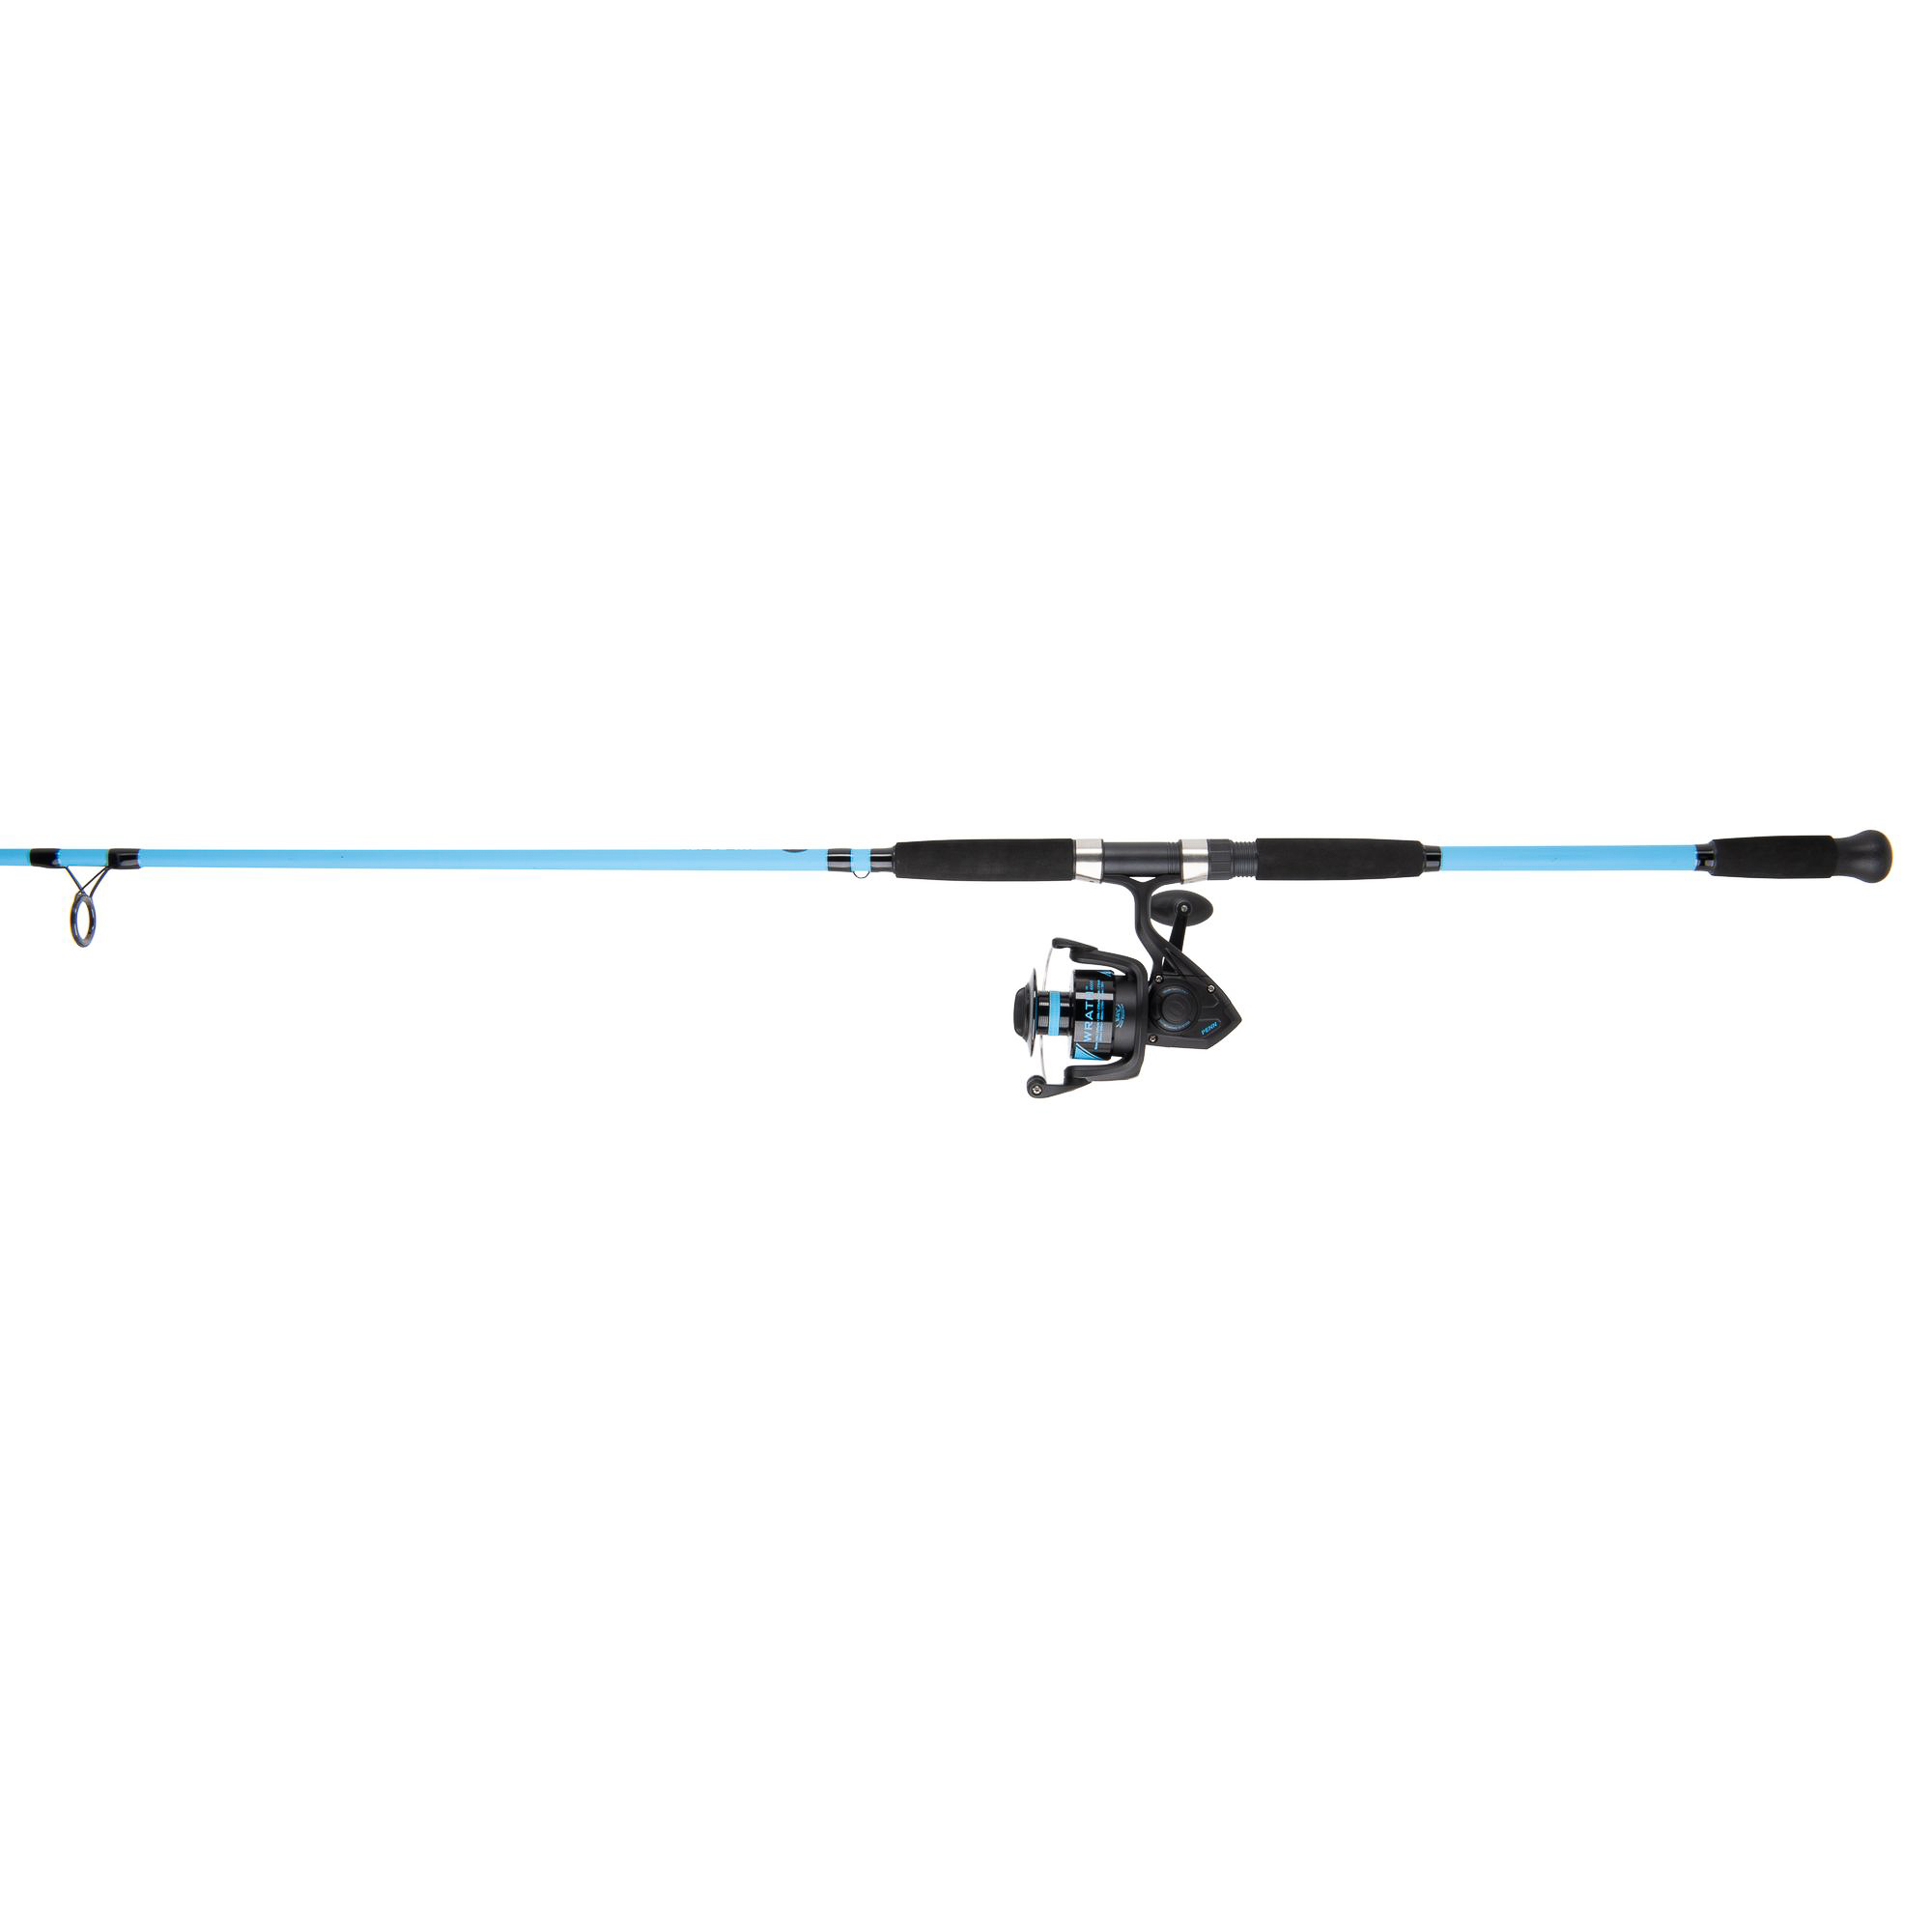 PENN 9 Ft. Wrath Fishing Rod and Reel Spinning Combo - image 3 of 5